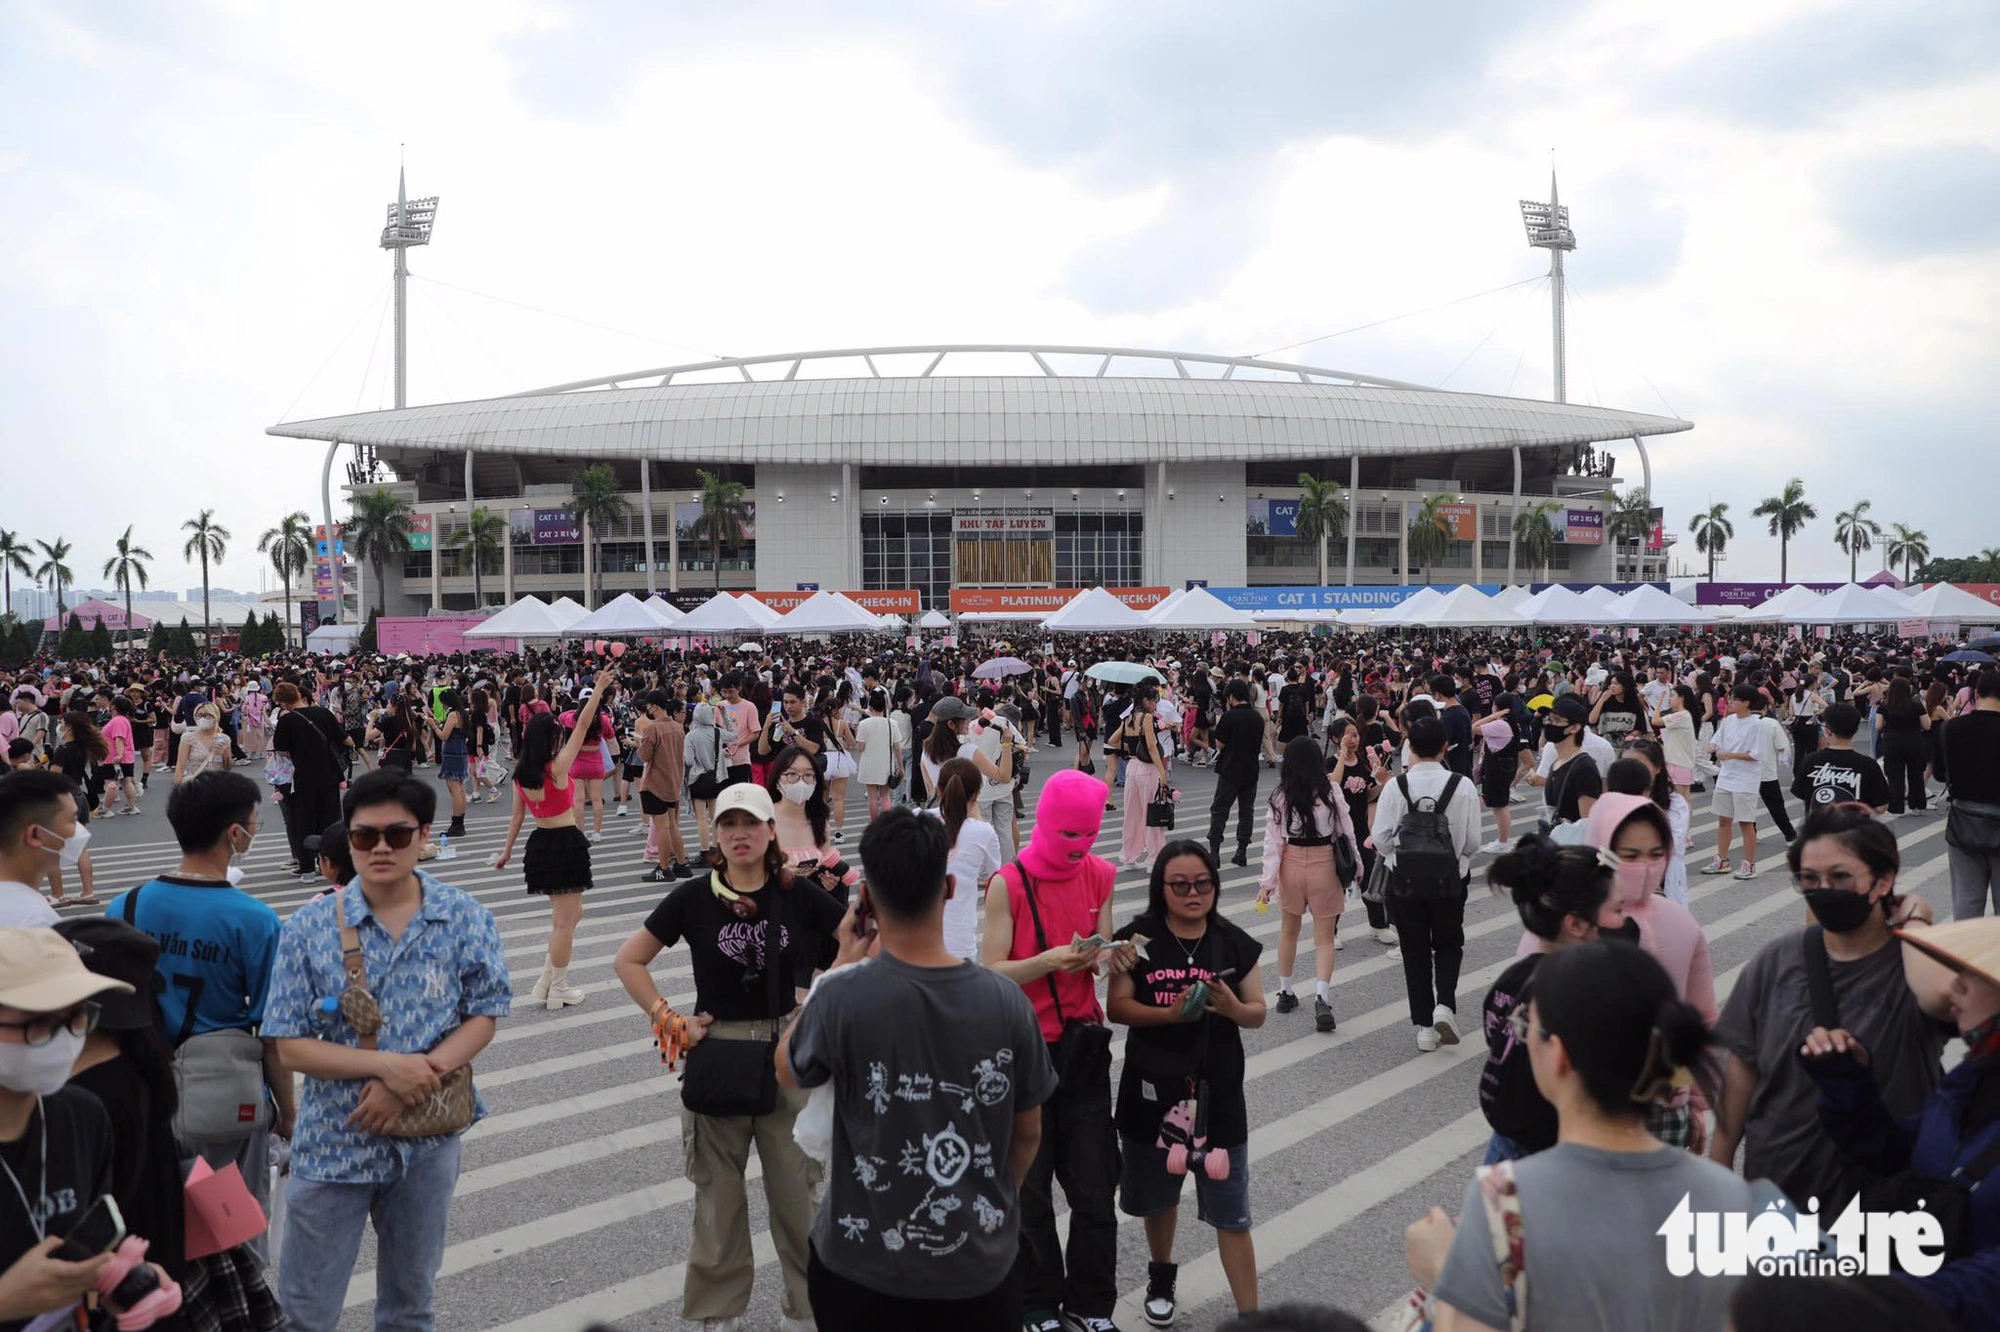 Concert-goers flock to the Hanoi-based My Dinh National Stadium early despite the hot weather. Photo: Danh Khang / Tuoi Tre